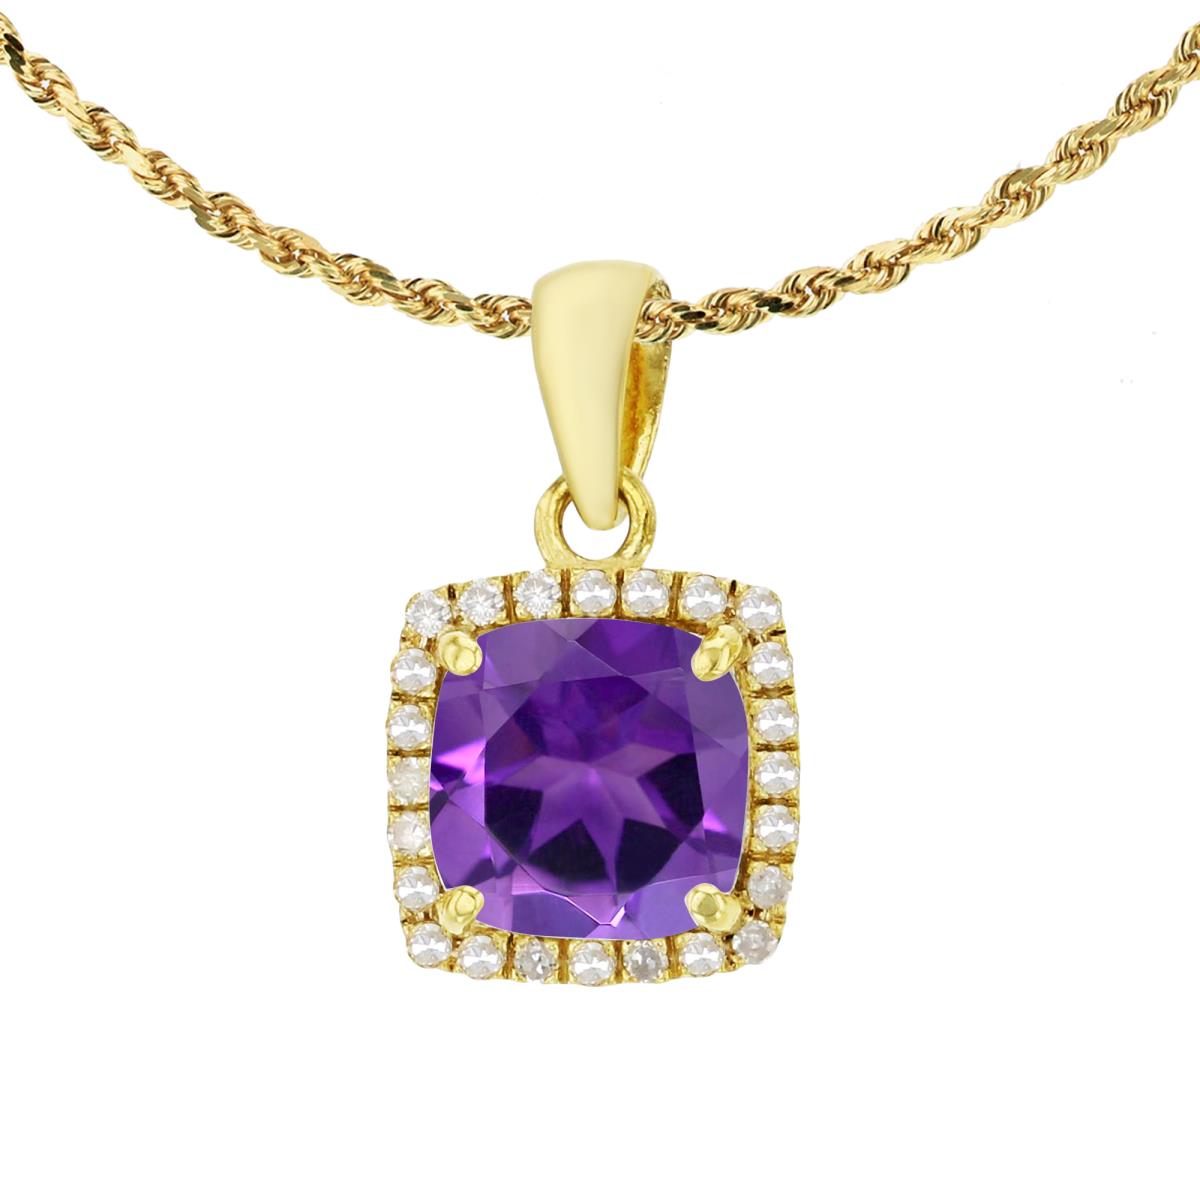 14K Yellow Gold 7mm Cushion Amethyst & 0.12 CTTW Diamond Halo 18" Rope Chain Necklace